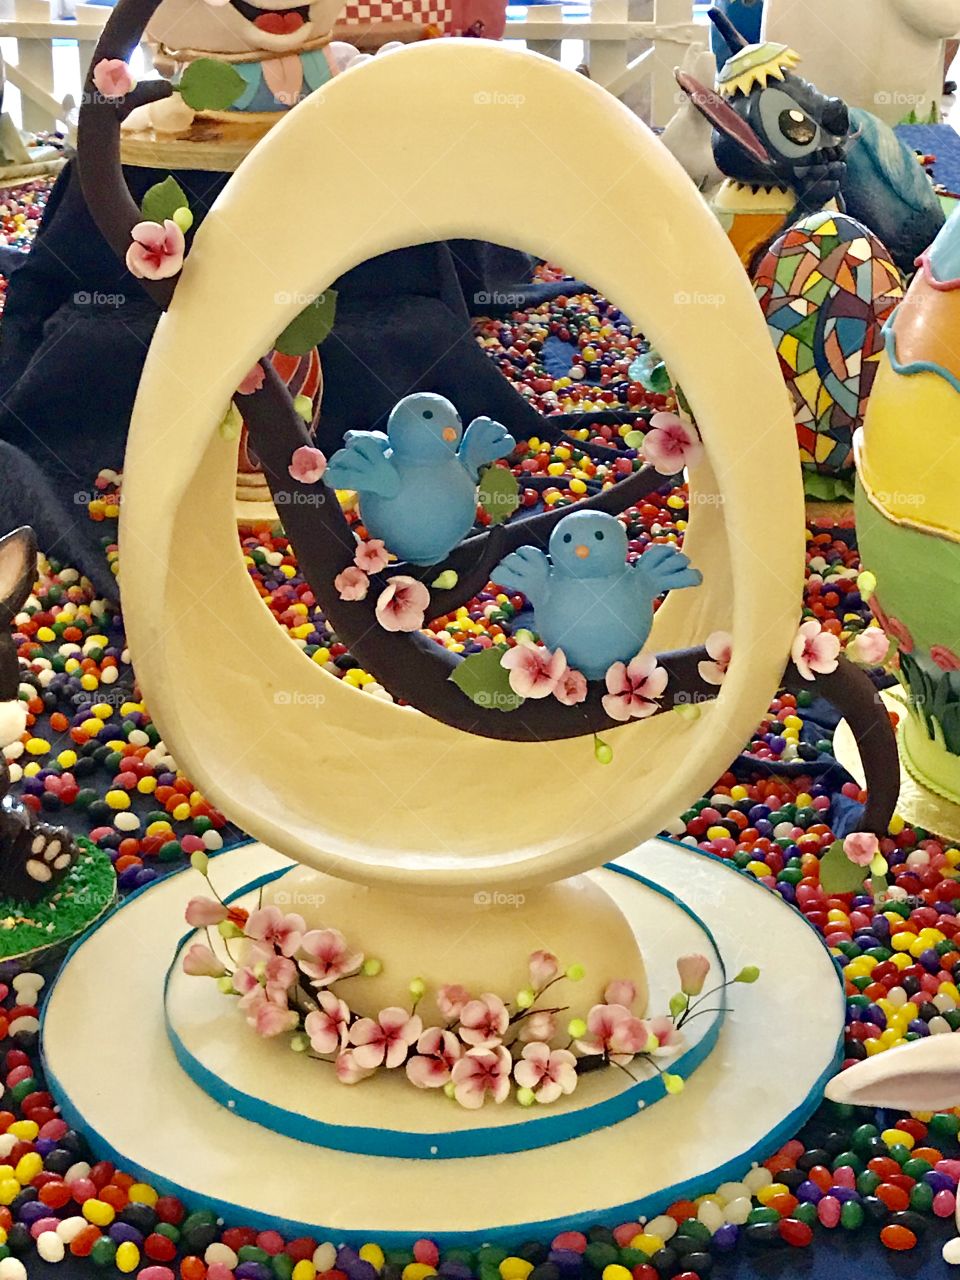 Beautifully Hand crafted Easter centerpiece from the Disney bakers at the Boardwalk resort in Orlando Florida 